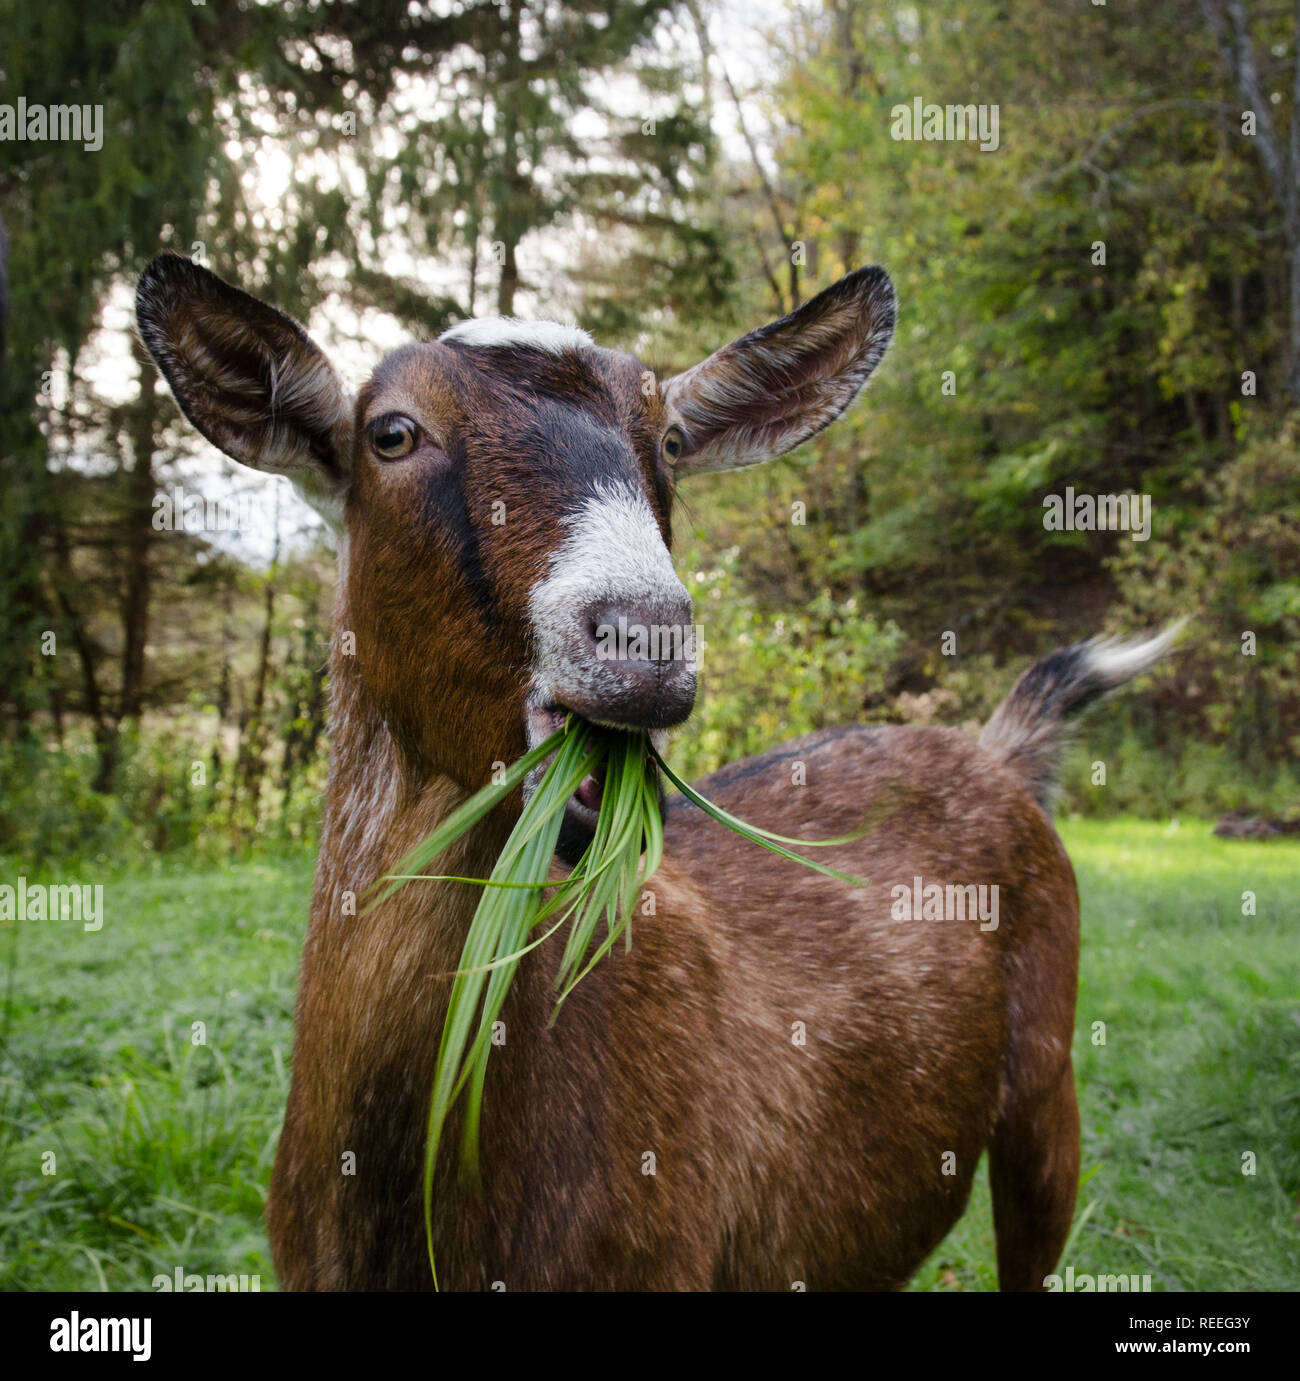 A goat eating grass, looking at the camera Stock Photo